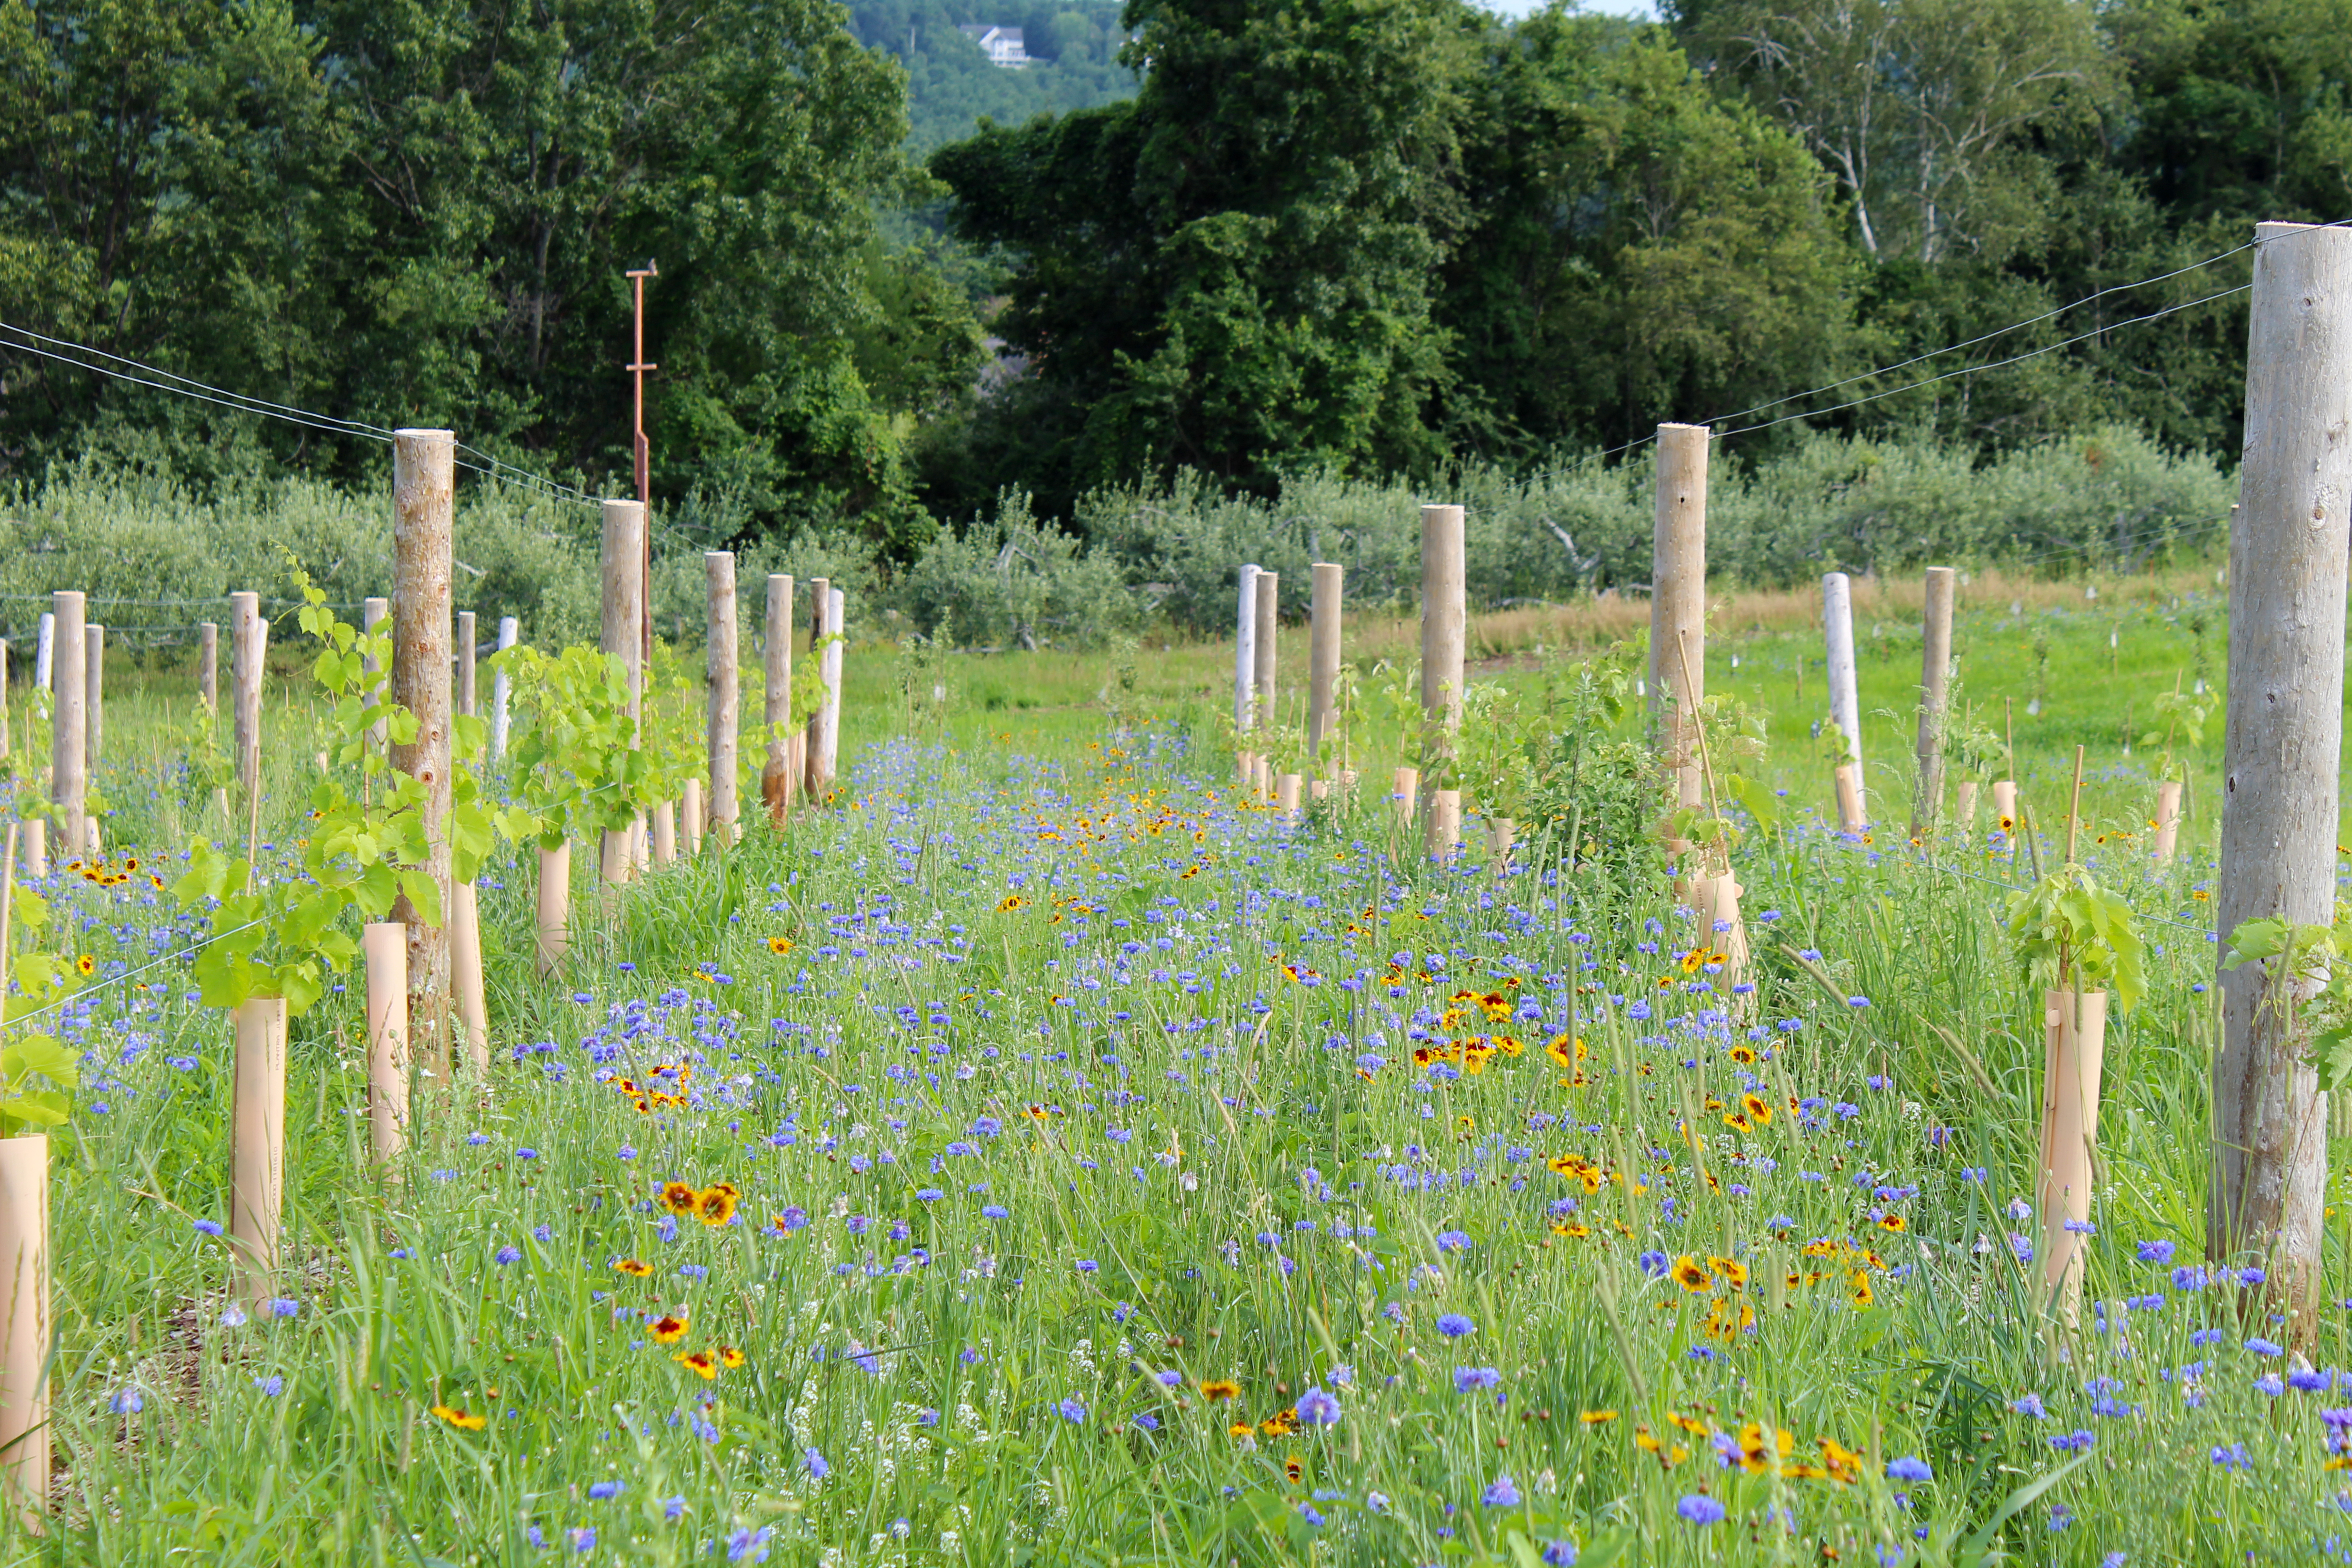 Colorful blooms of blue, red, and yellow blanket the rows between newly-planted saplings.